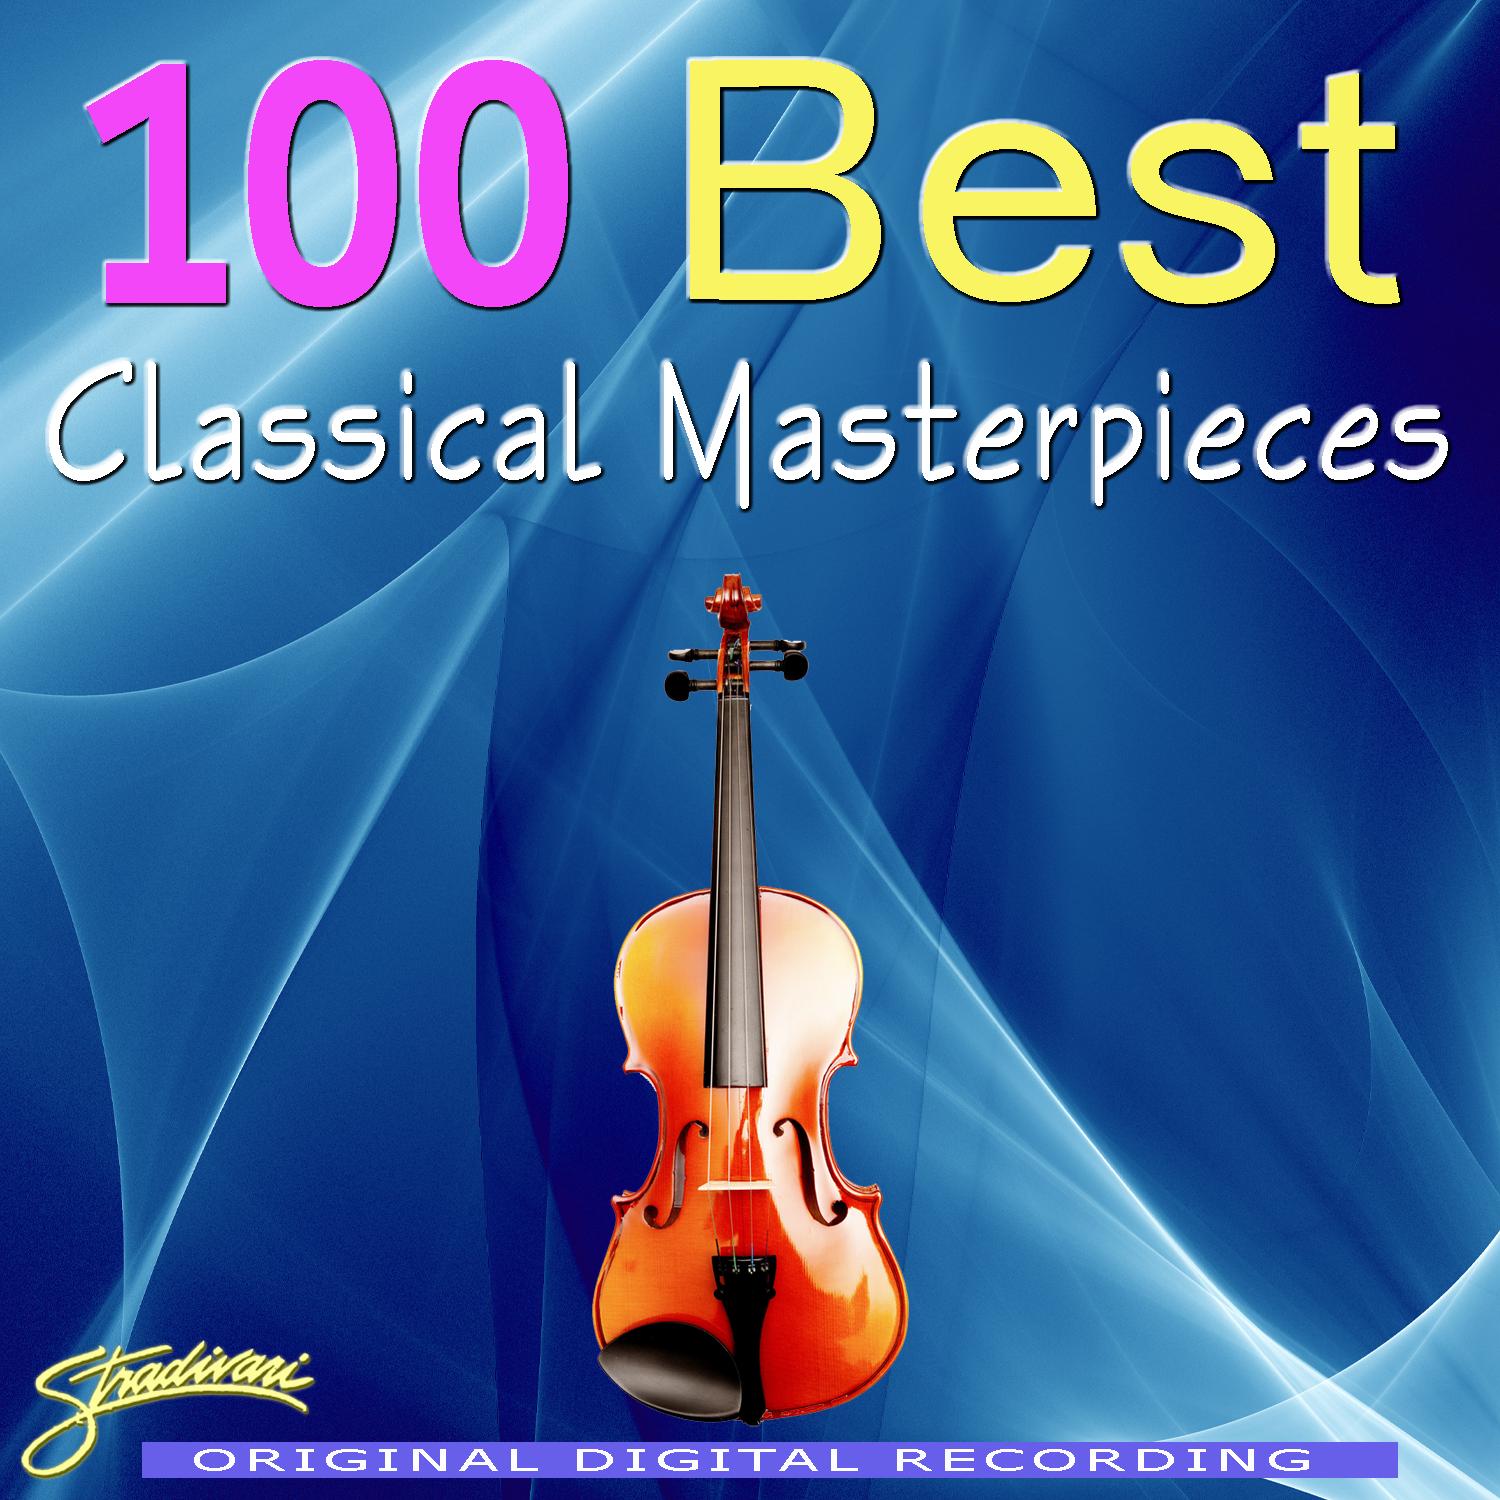 100 Best Classical Masterpieces Volumes 1-8